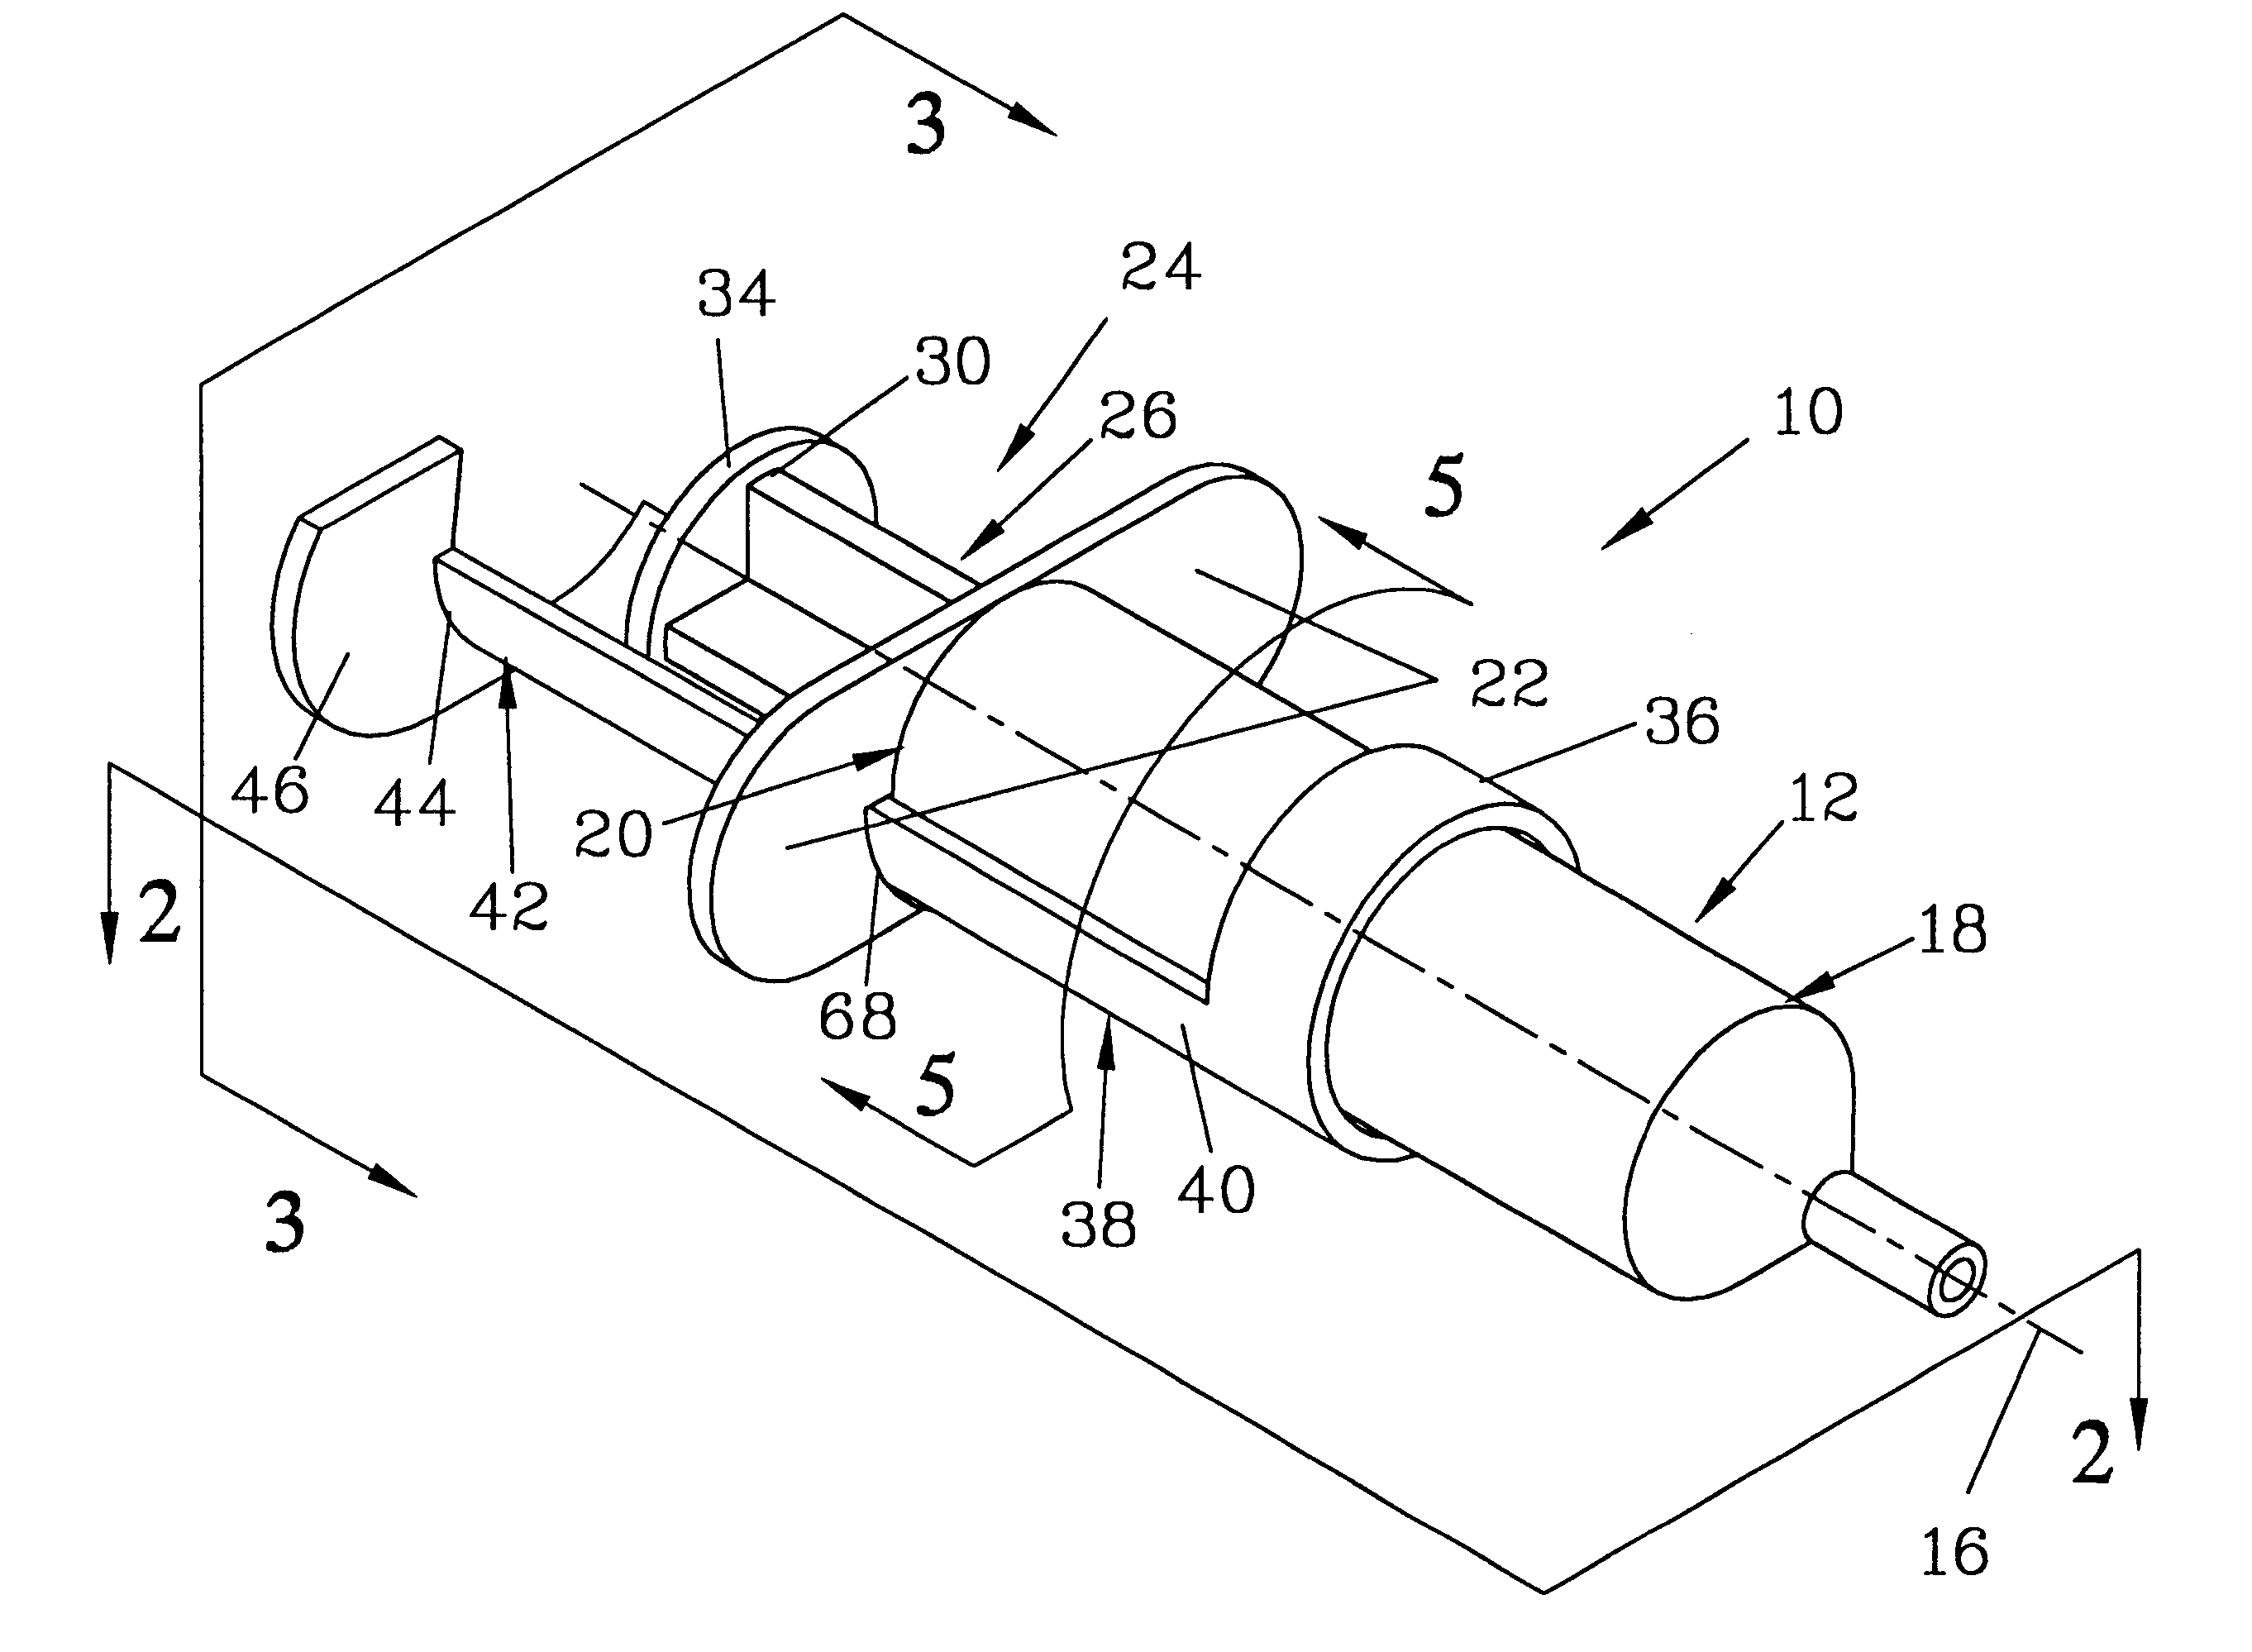 One-handed single grip position aspiration and injection syringe